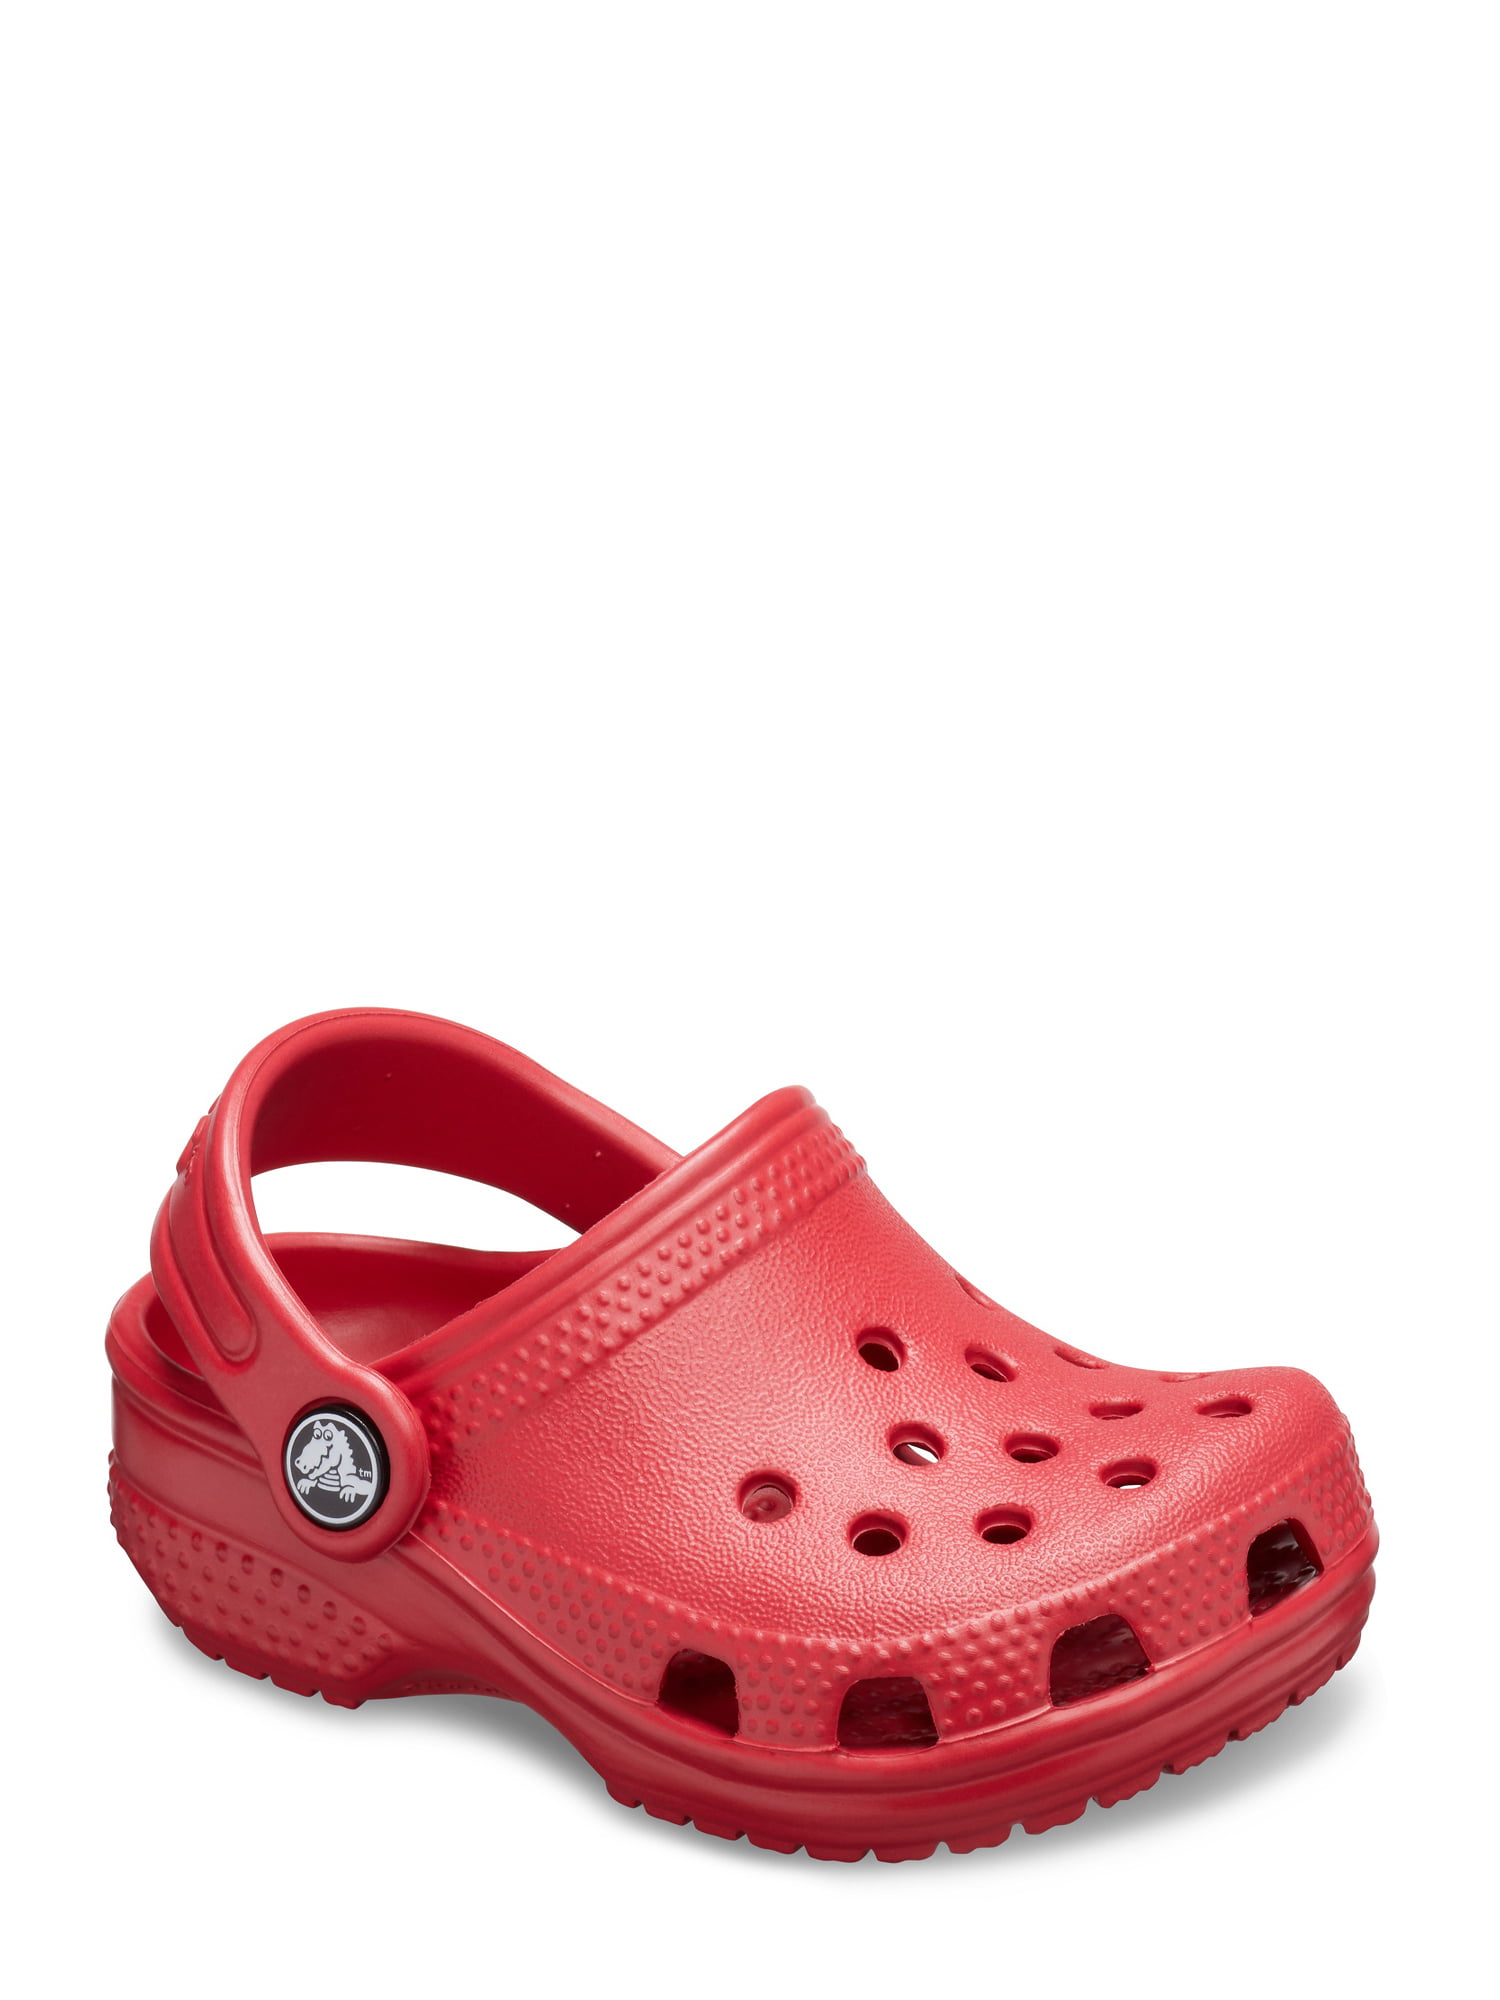 does walmart have crocs in store